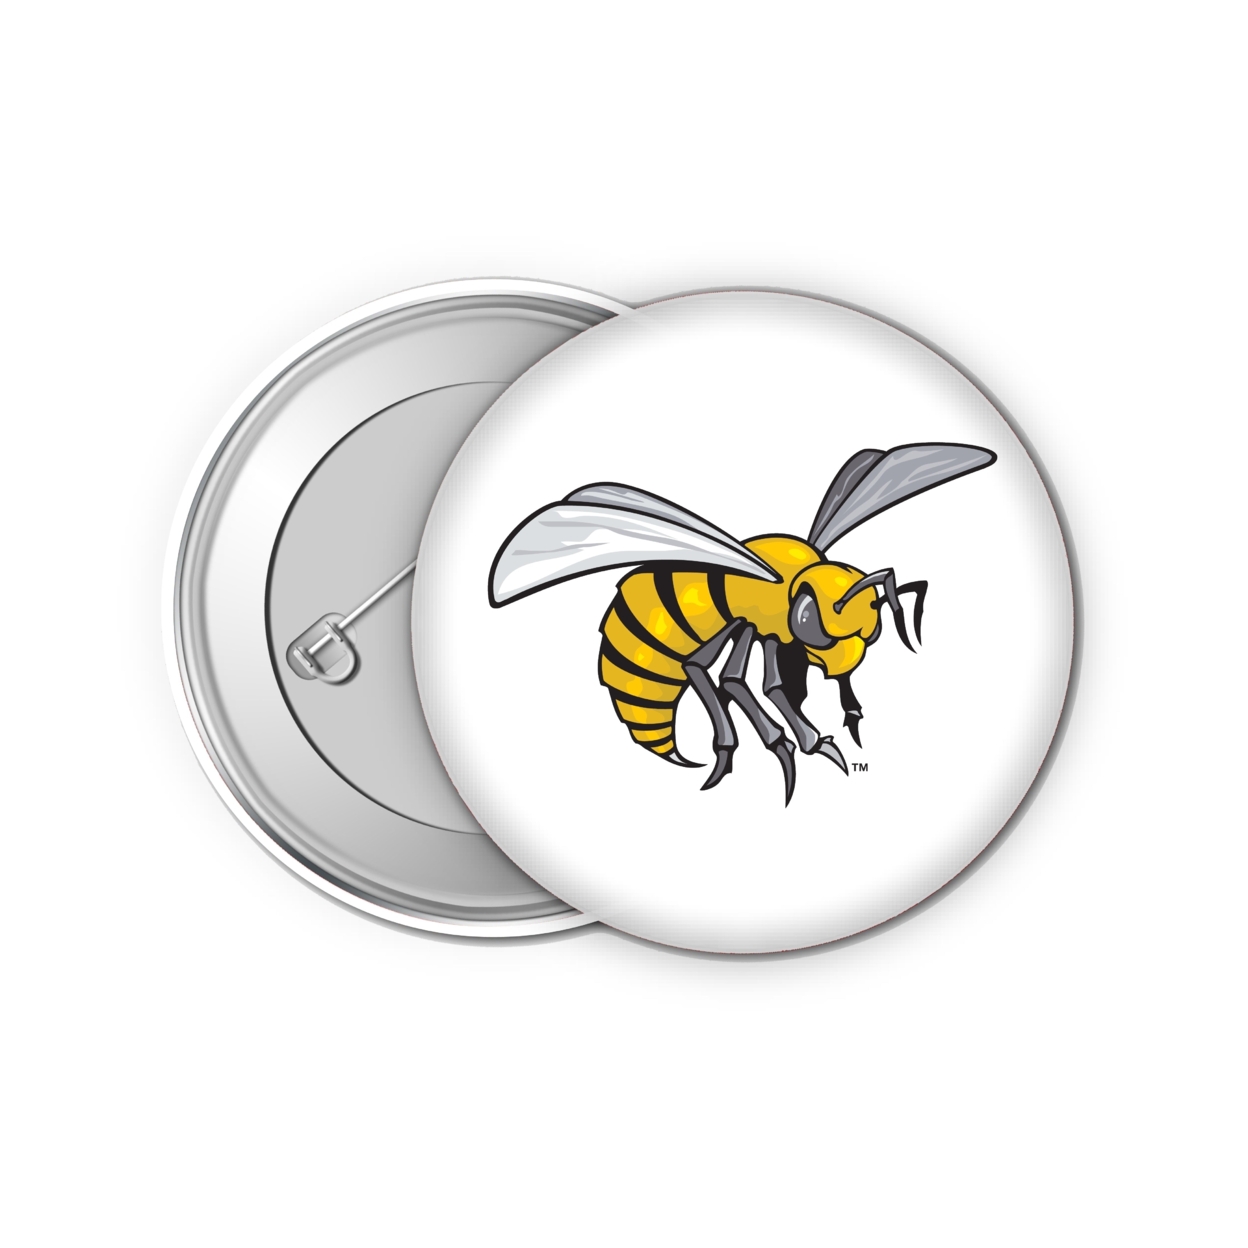 Alabama State University Small 1-Inch Button Pin 4 Pack